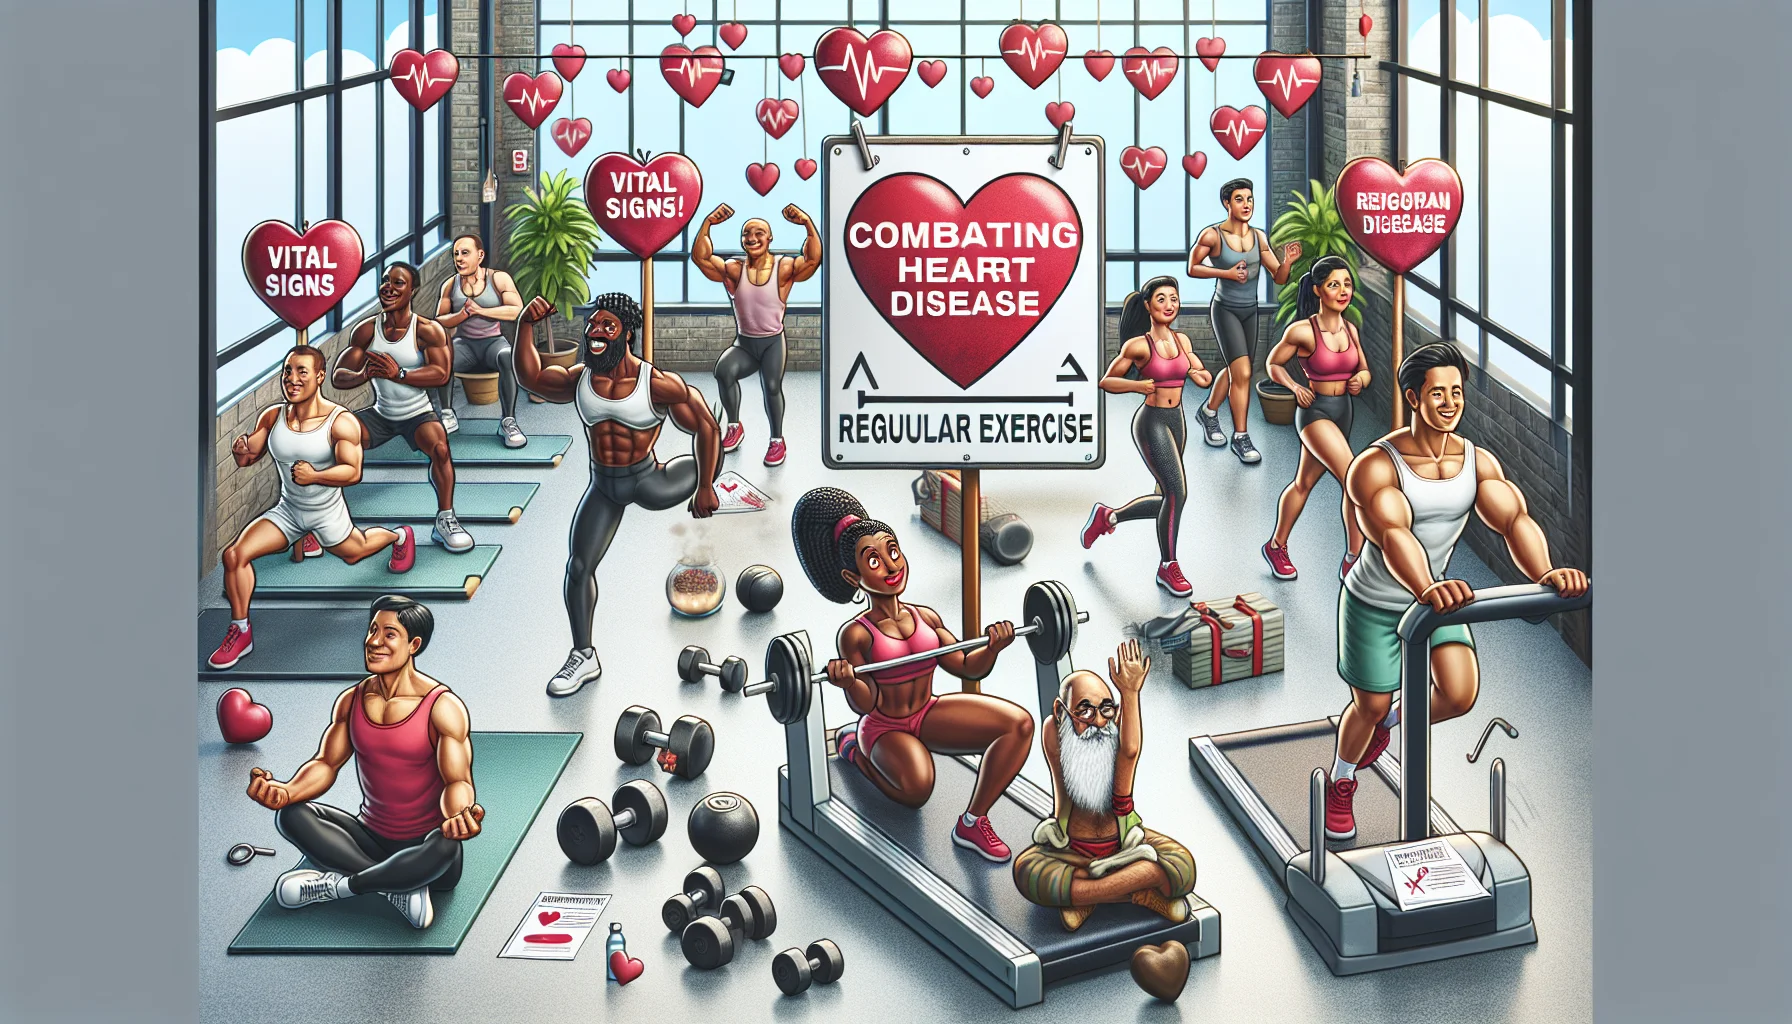 Create a humorous and realistic image that showcases the importance of combating heart disease through regular exercise. Picture a gym setting filled with fitness enthusiasts of different genders and descents, such as a Black woman lifting weights, a Hispanic man running on a treadmill and a South Asian person performing yoga. They all are surrounded by heart shaped signs with encouraging messages about regular exercise and physical fitness. A creatively designed signboard displays 'Vital Signs: Combating Heart Disease', making the scenario relatable yet enticing for the viewers.